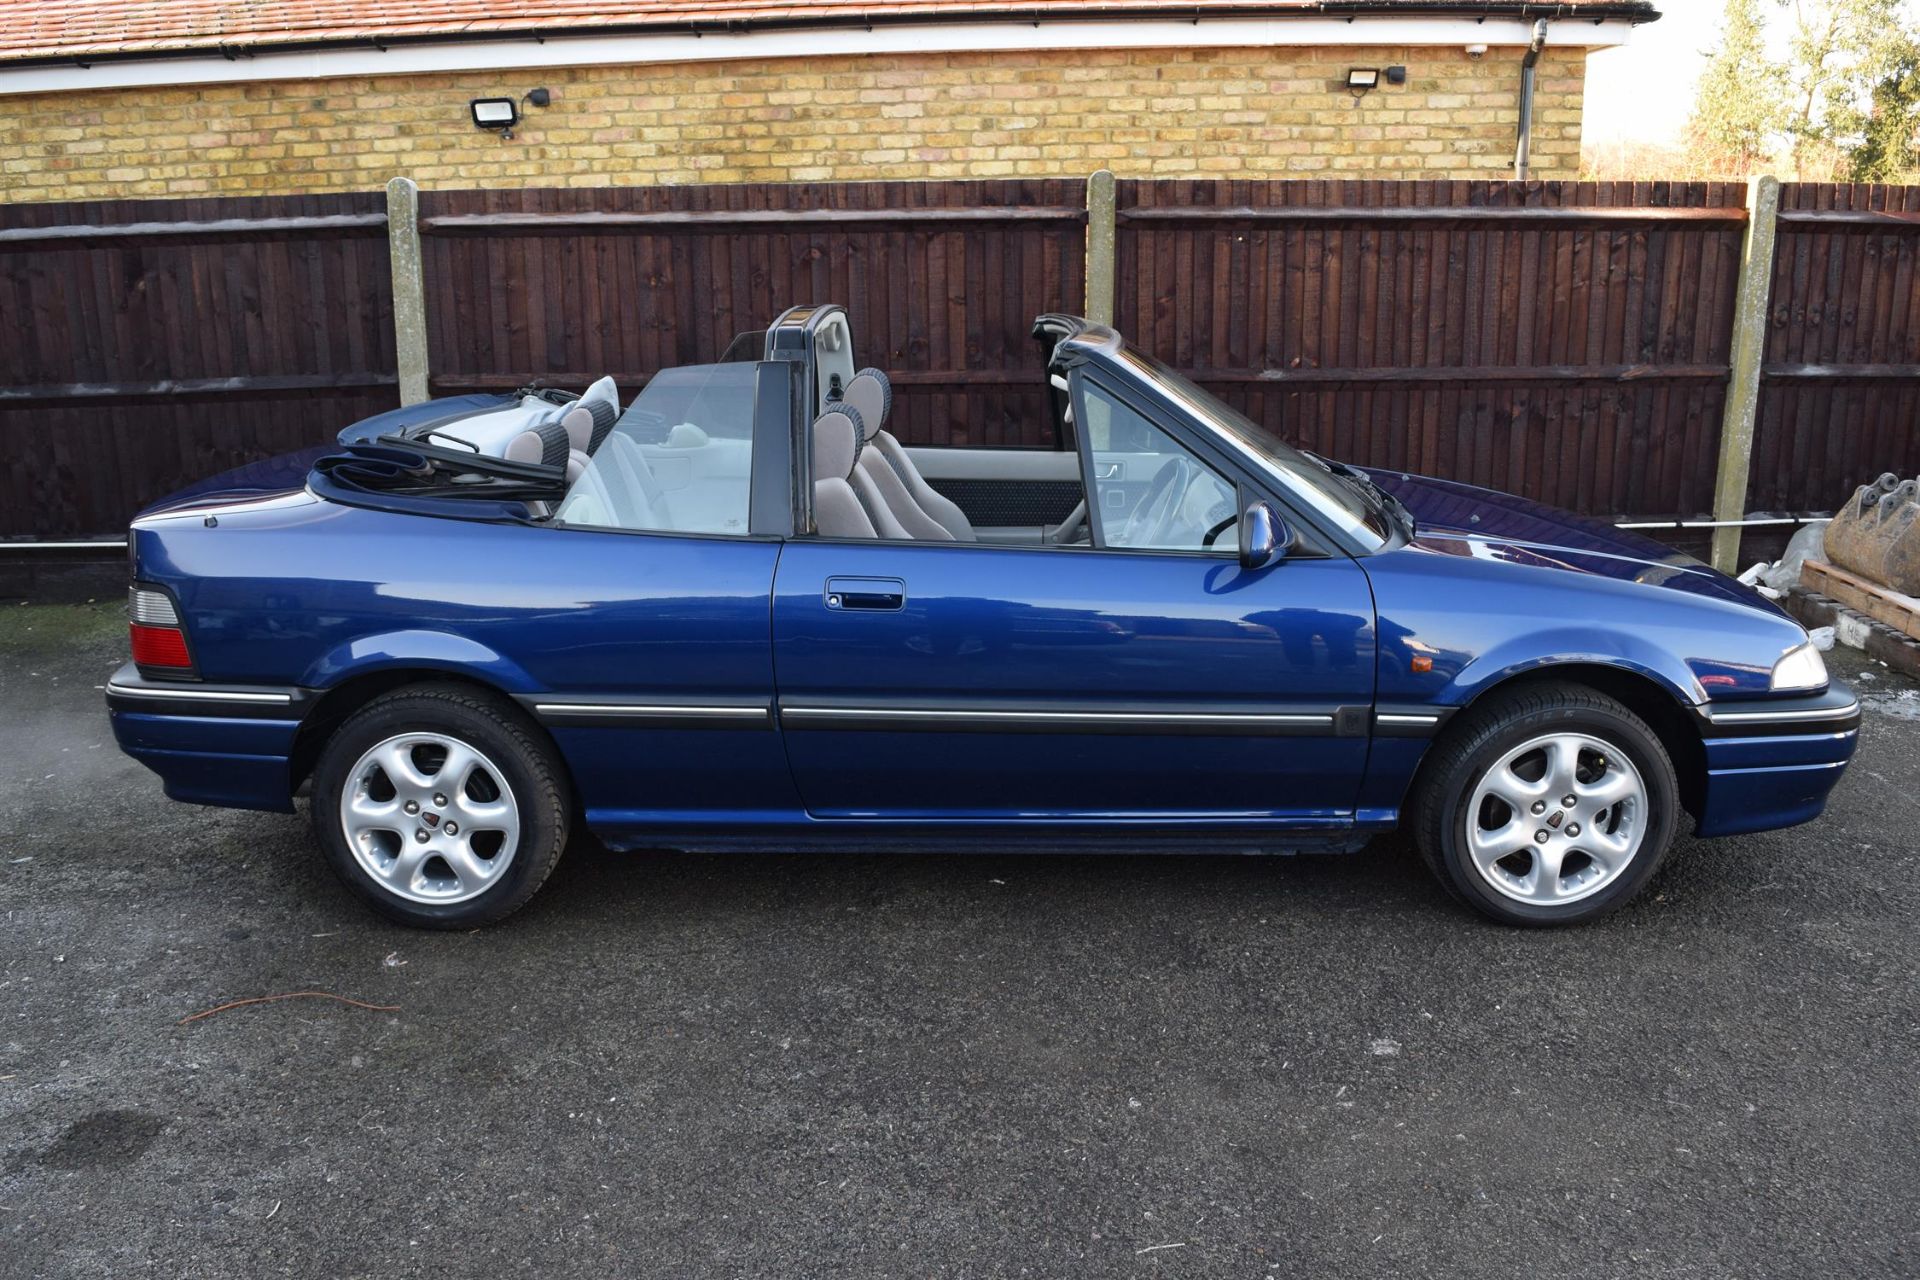 1996 Rover 216 Cabriolet - Image 5 of 25